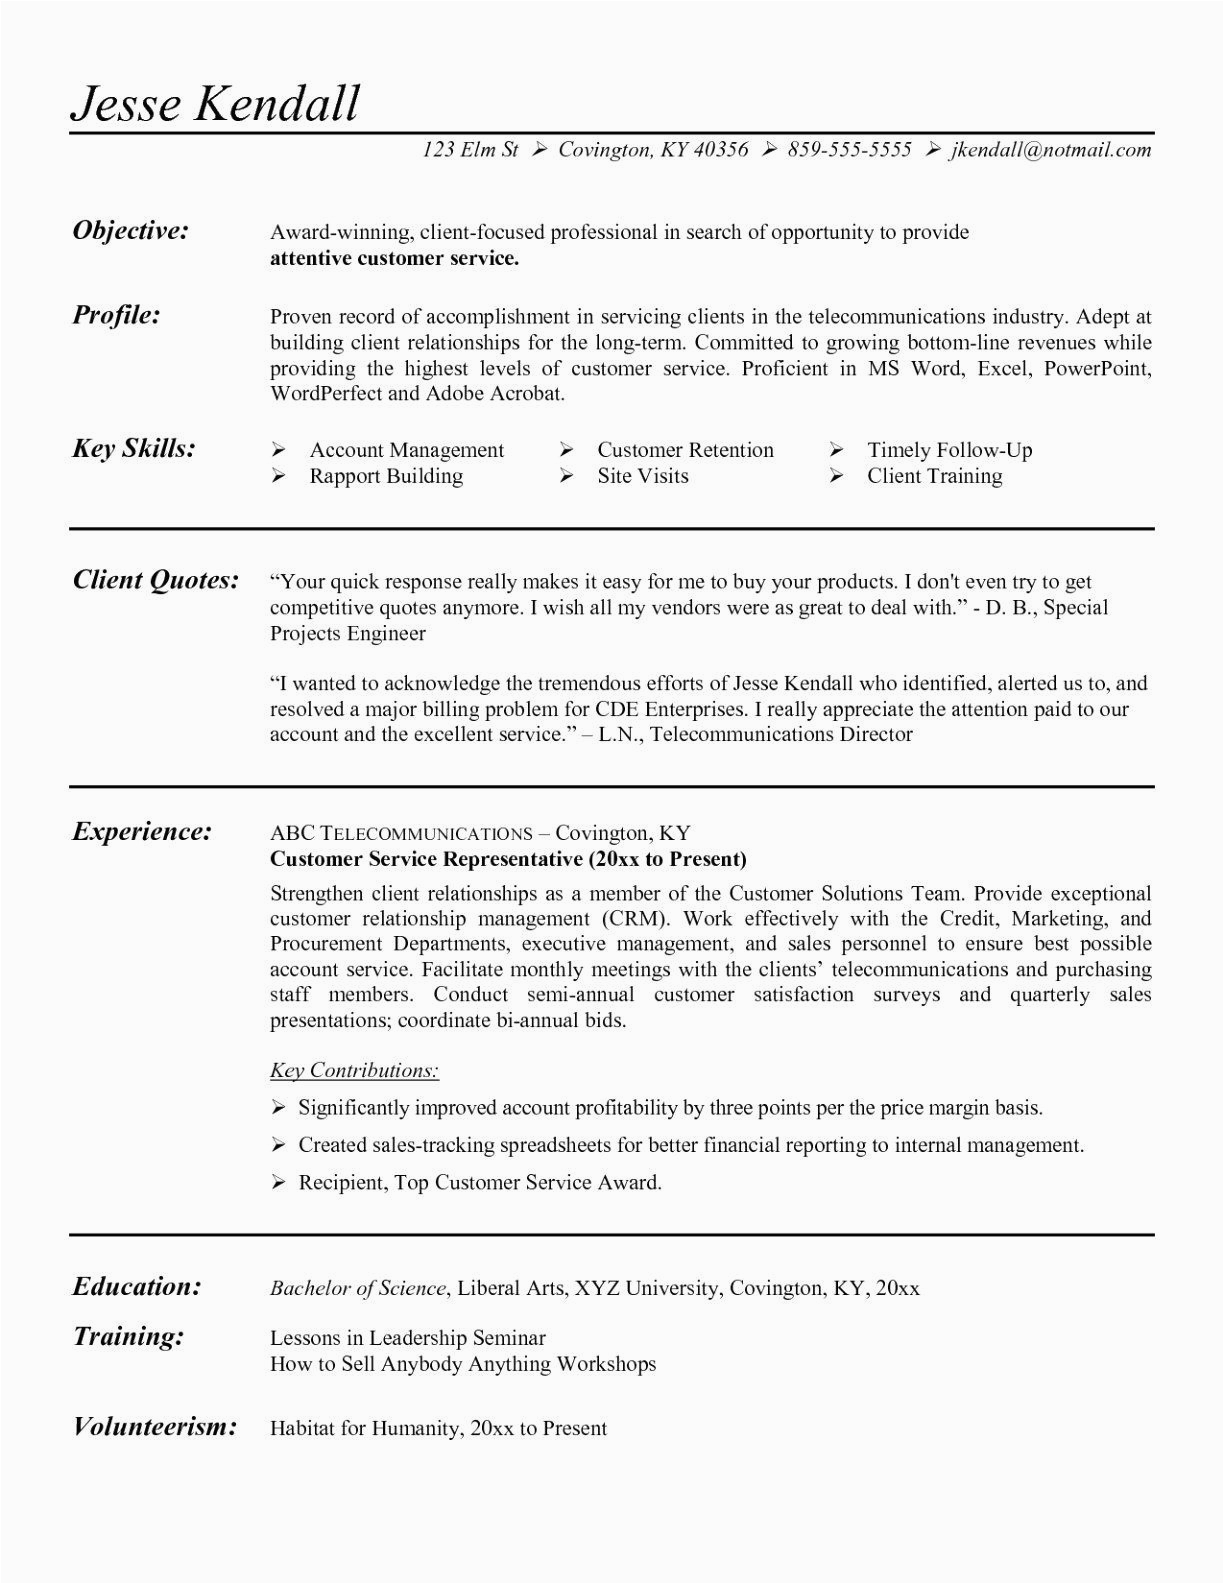 Sample Resume Objectives for Human Services 23 Human Services Resume Examples In 2020